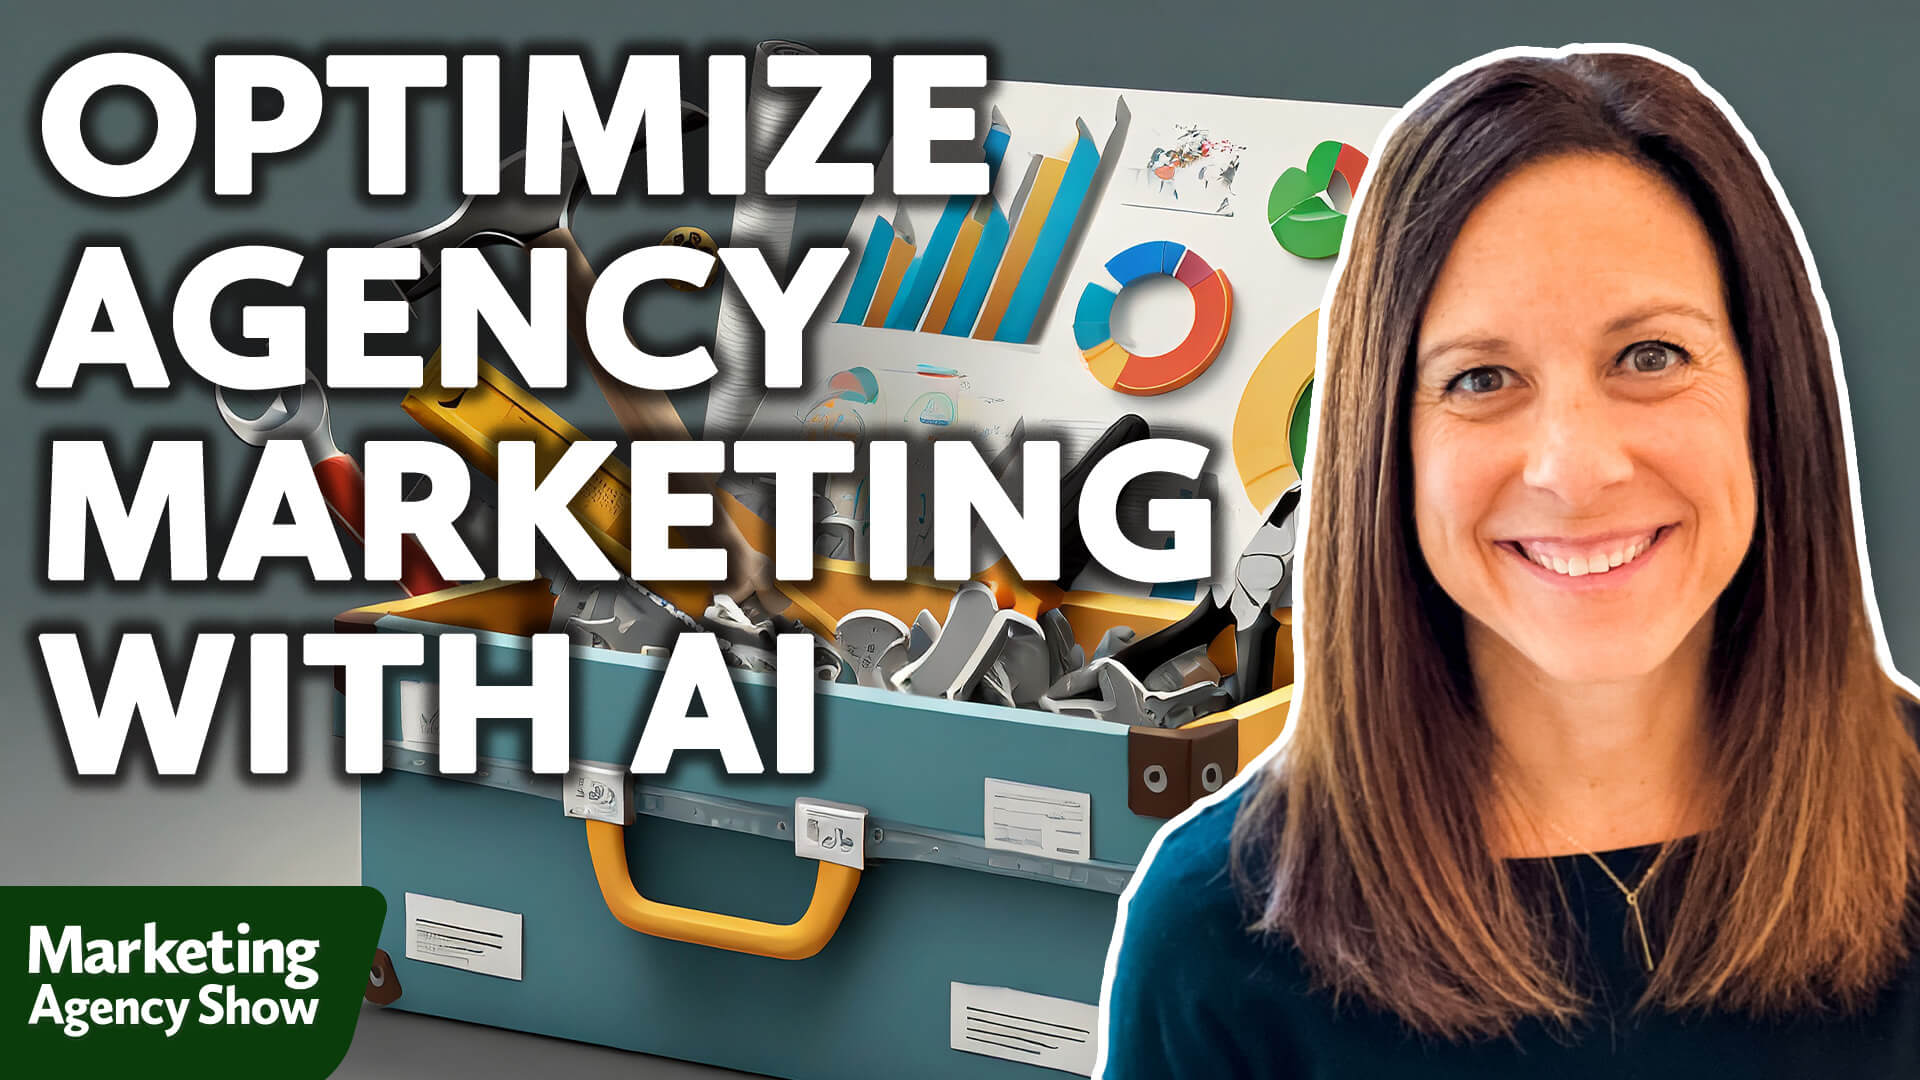 How to Optimize Agency Marketing With AI